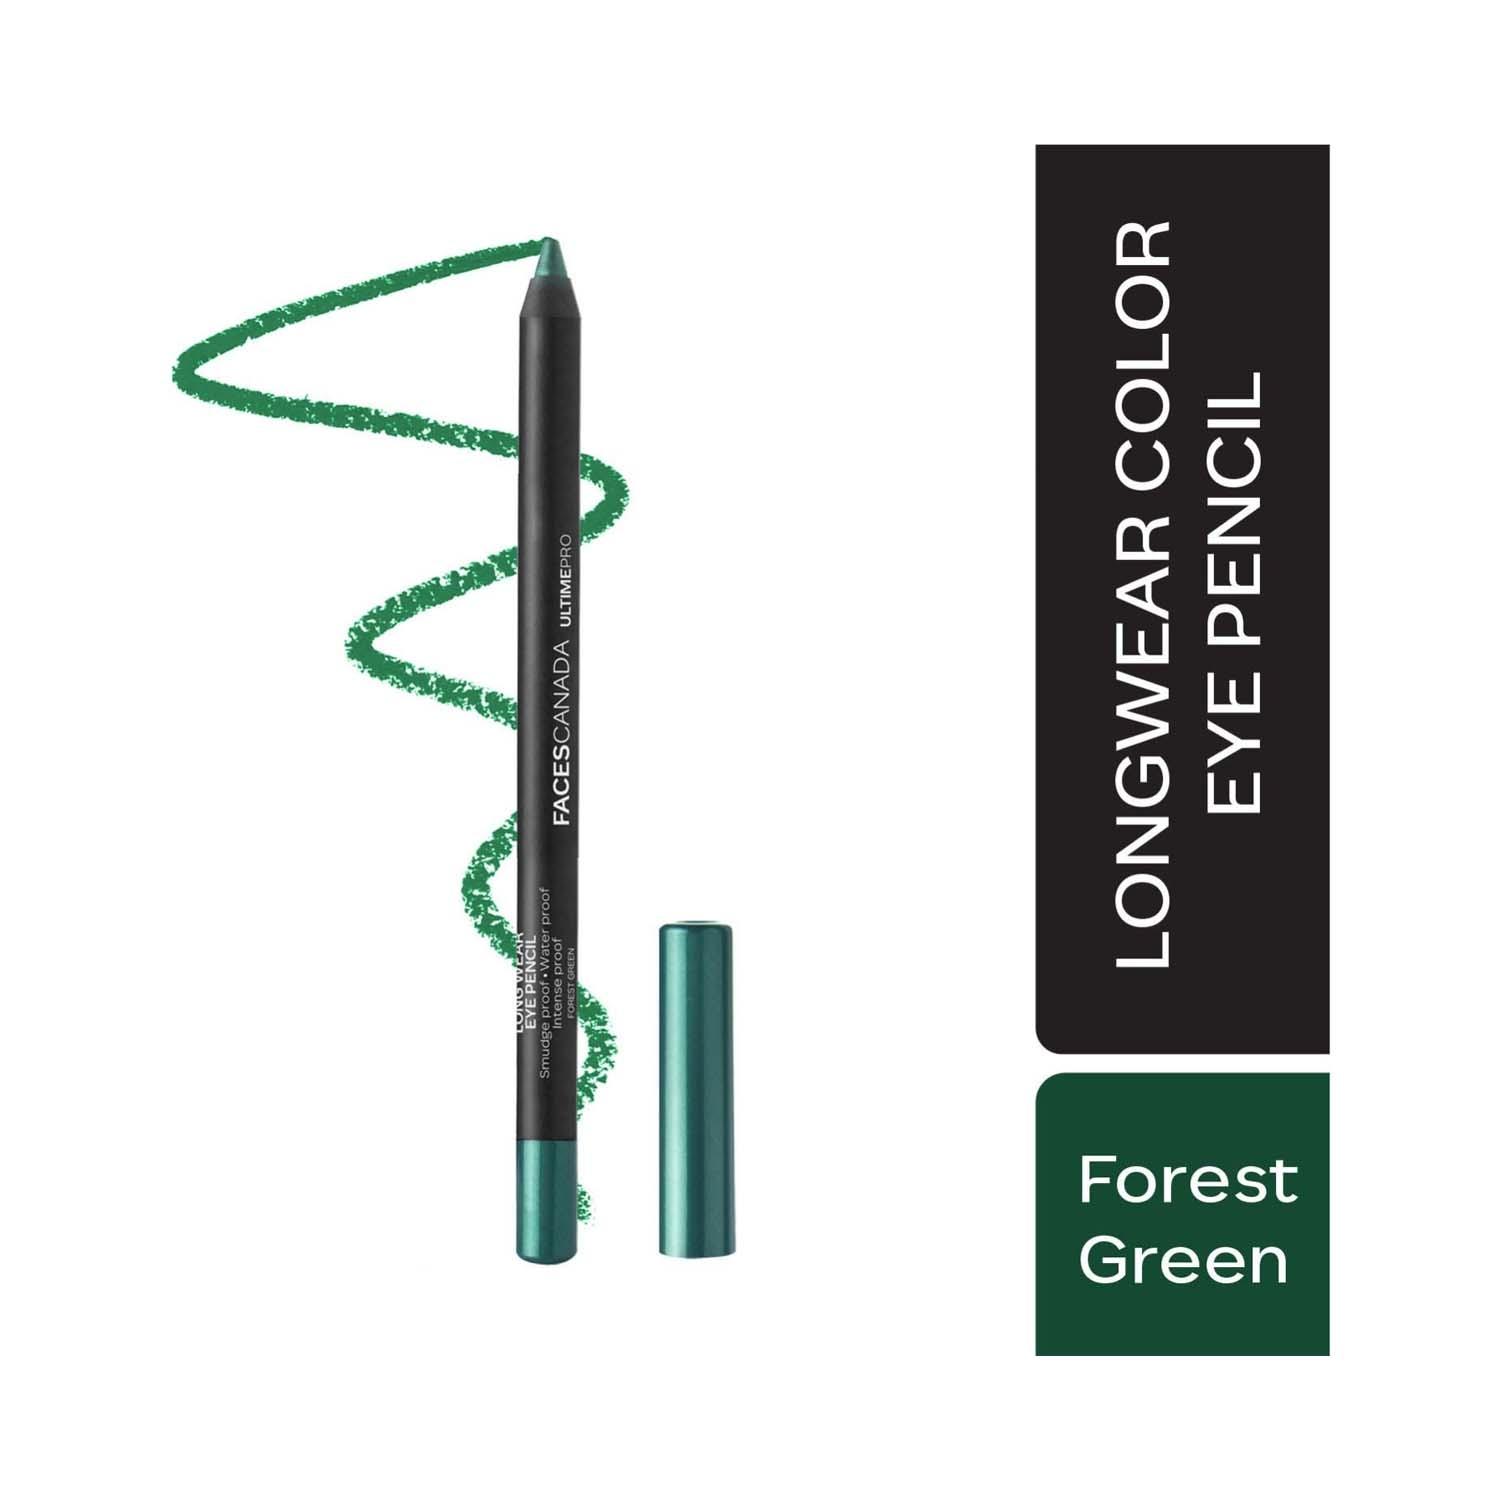 Faces Canada Eye Pencil - Forest Green (1.2g)